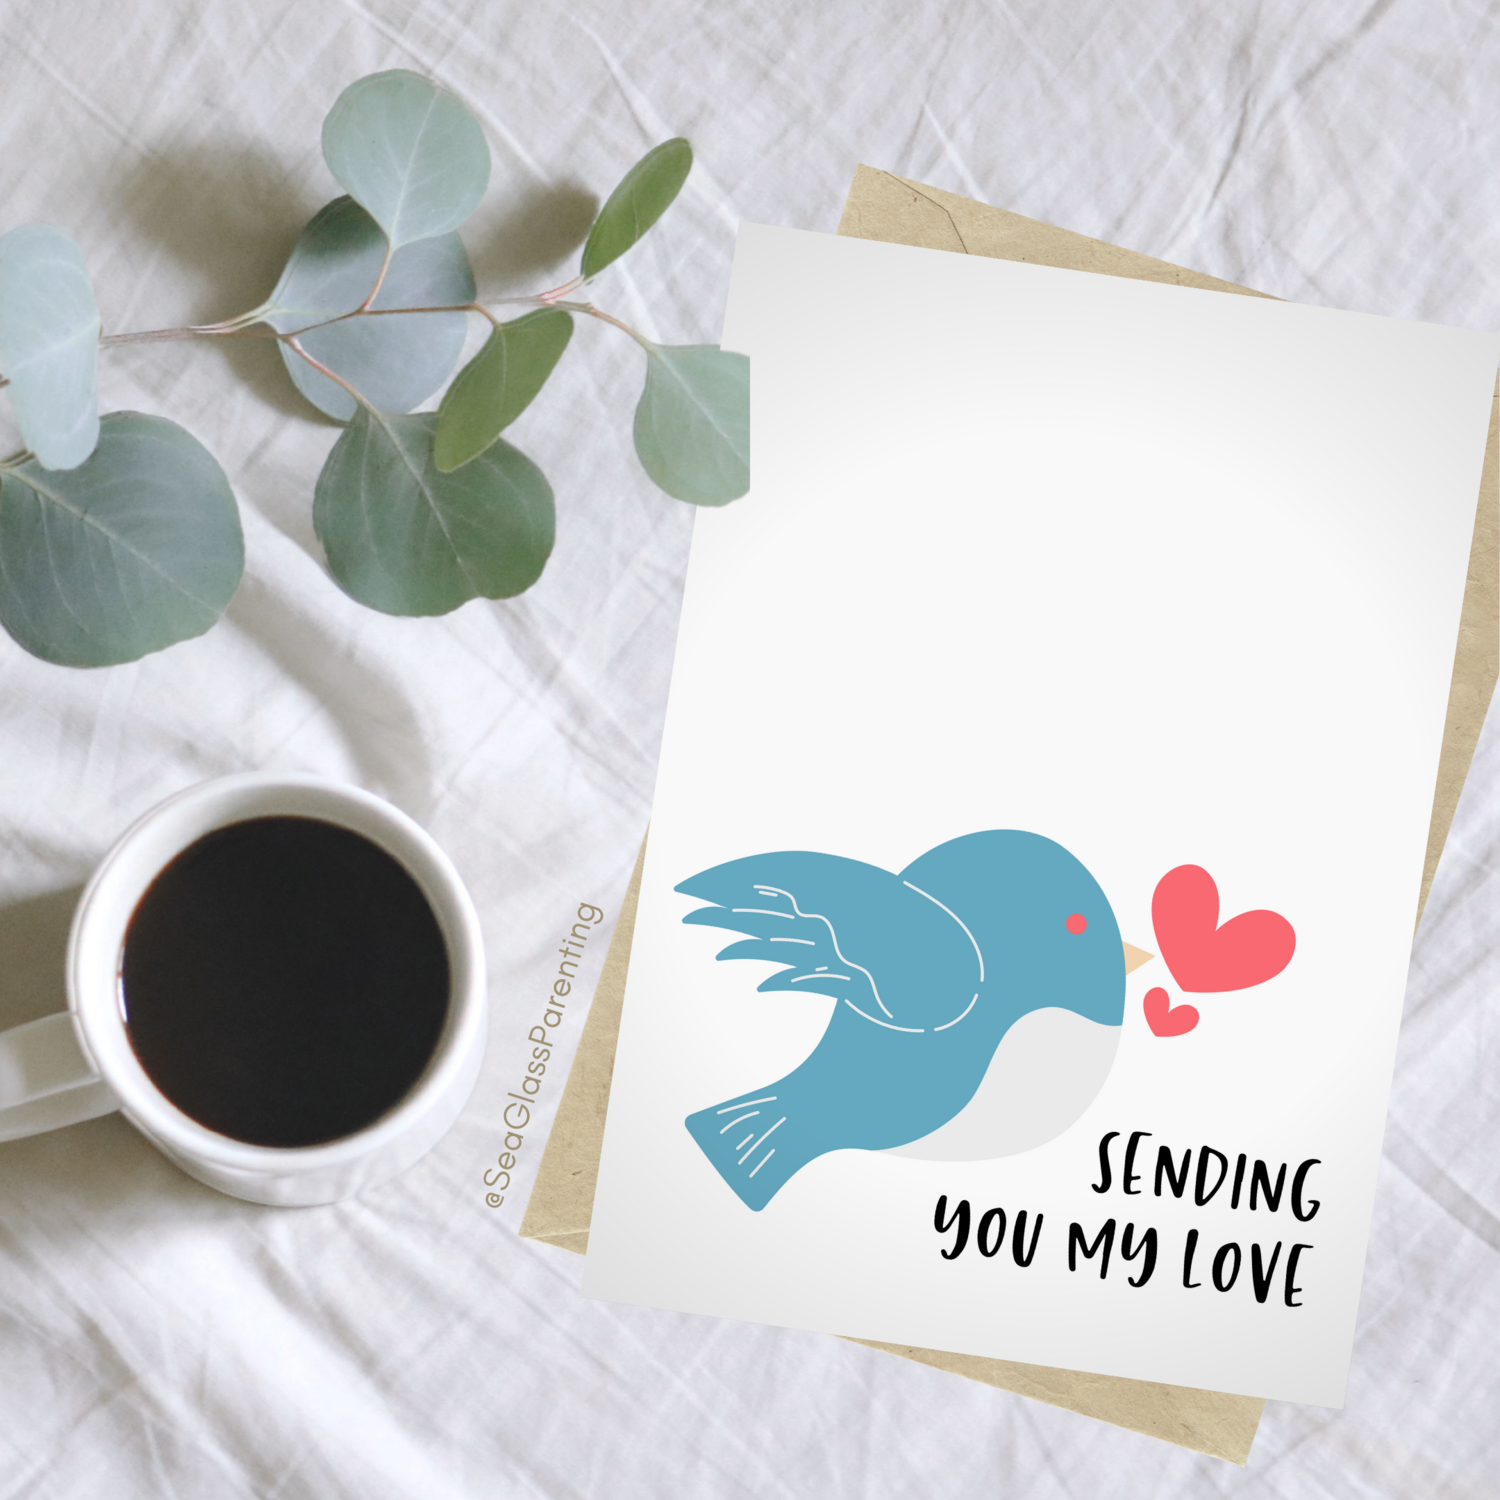 Sending you my love with bird—Grief and loss support (greeting card)